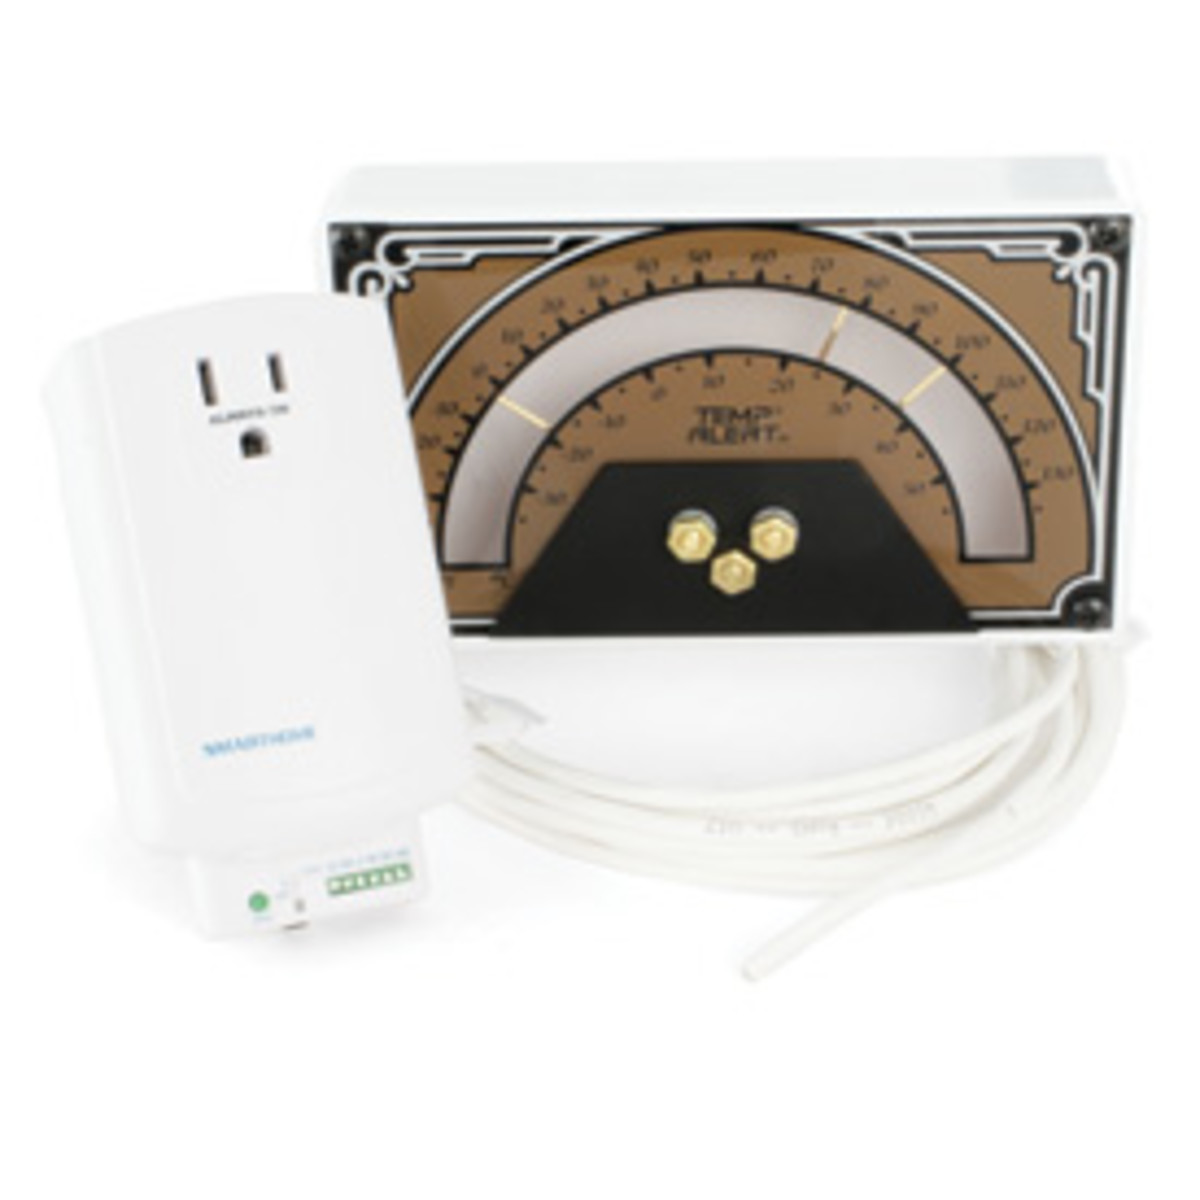 I/O Linc - INSTEON High and Low Temperature Threshold Kit --  image credit: SmartHome